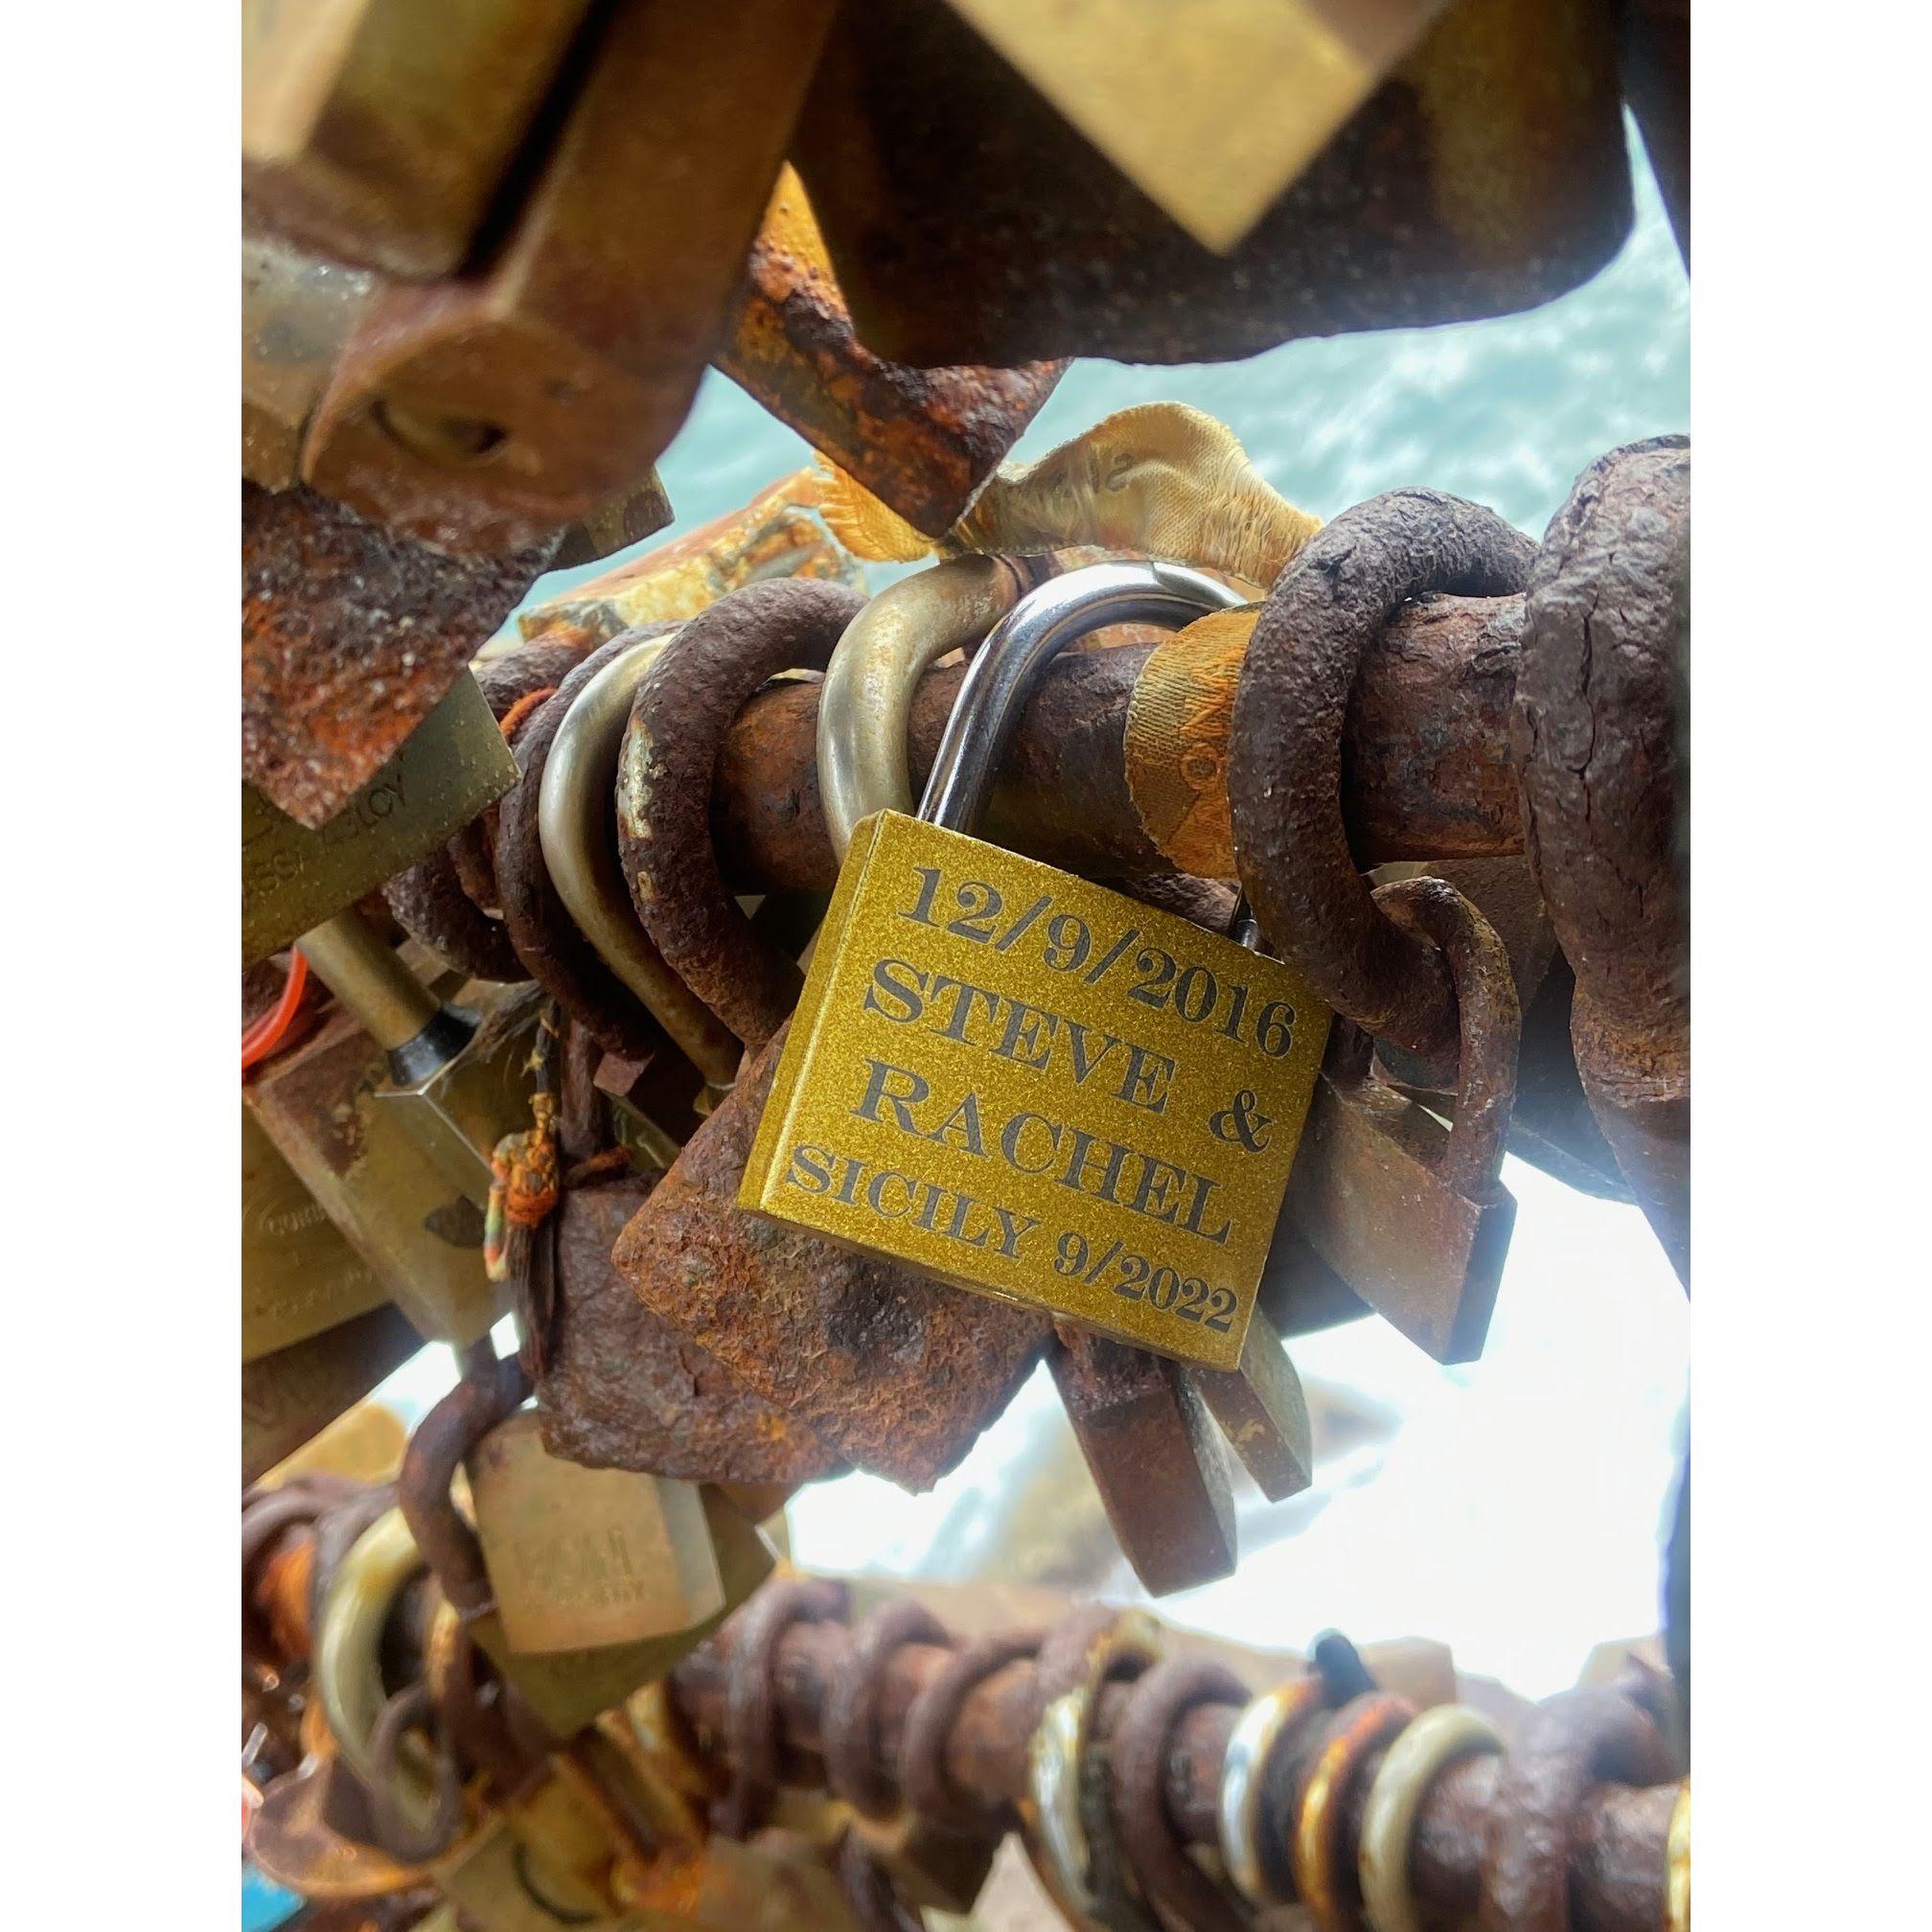 Our love lock remains in Cefalu, Sicily awaiting our return